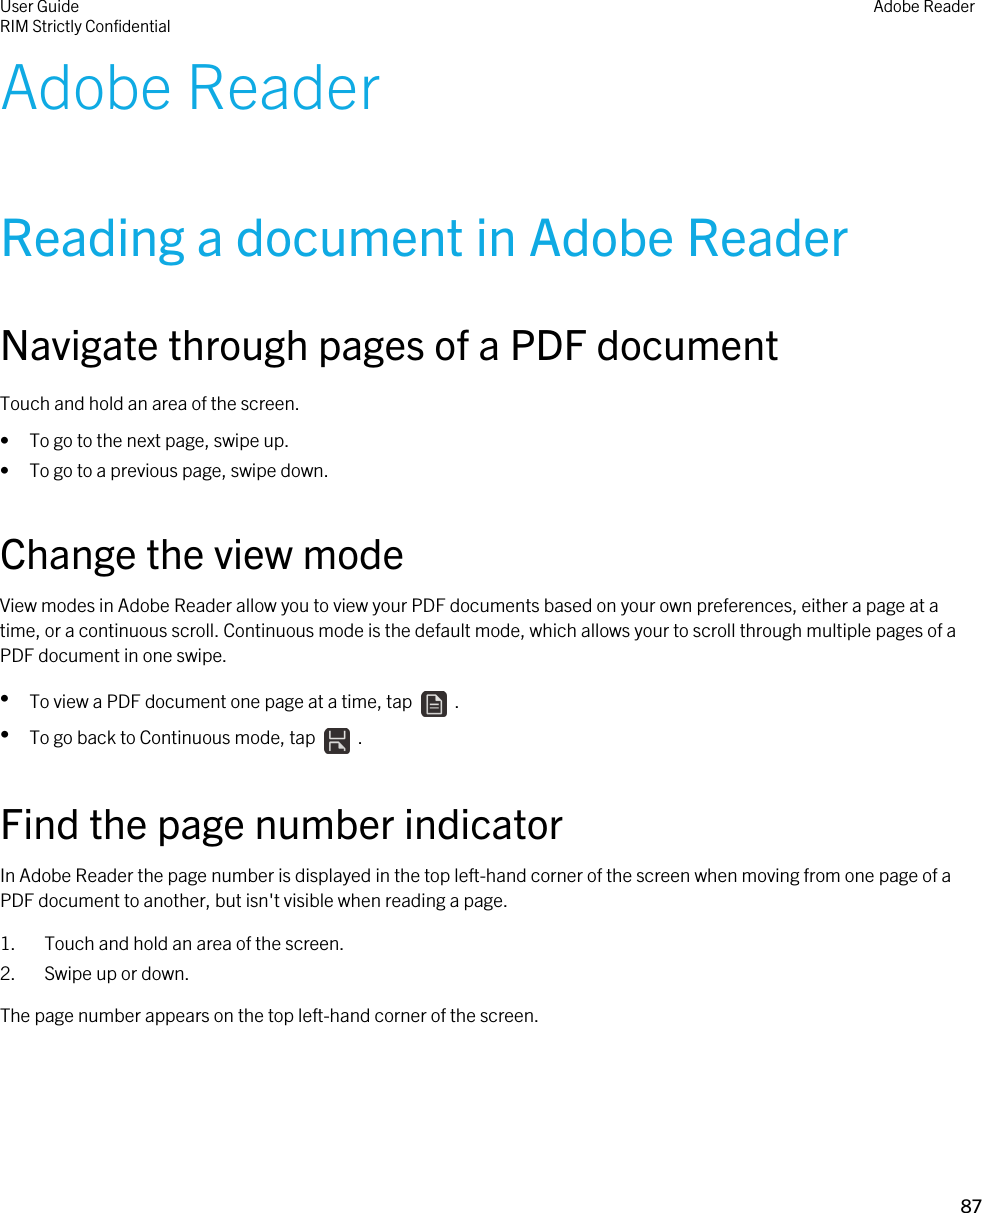 Adobe ReaderReading a document in Adobe ReaderNavigate through pages of a PDF documentTouch and hold an area of the screen.• To go to the next page, swipe up.• To go to a previous page, swipe down.Change the view modeView modes in Adobe Reader allow you to view your PDF documents based on your own preferences, either a page at a time, or a continuous scroll. Continuous mode is the default mode, which allows your to scroll through multiple pages of a PDF document in one swipe.•To view a PDF document one page at a time, tap    .•To go back to Continuous mode, tap    .Find the page number indicatorIn Adobe Reader the page number is displayed in the top left-hand corner of the screen when moving from one page of a PDF document to another, but isn&apos;t visible when reading a page.1. Touch and hold an area of the screen.2. Swipe up or down.The page number appears on the top left-hand corner of the screen.User GuideRIM Strictly ConfidentialAdobe Reader87 